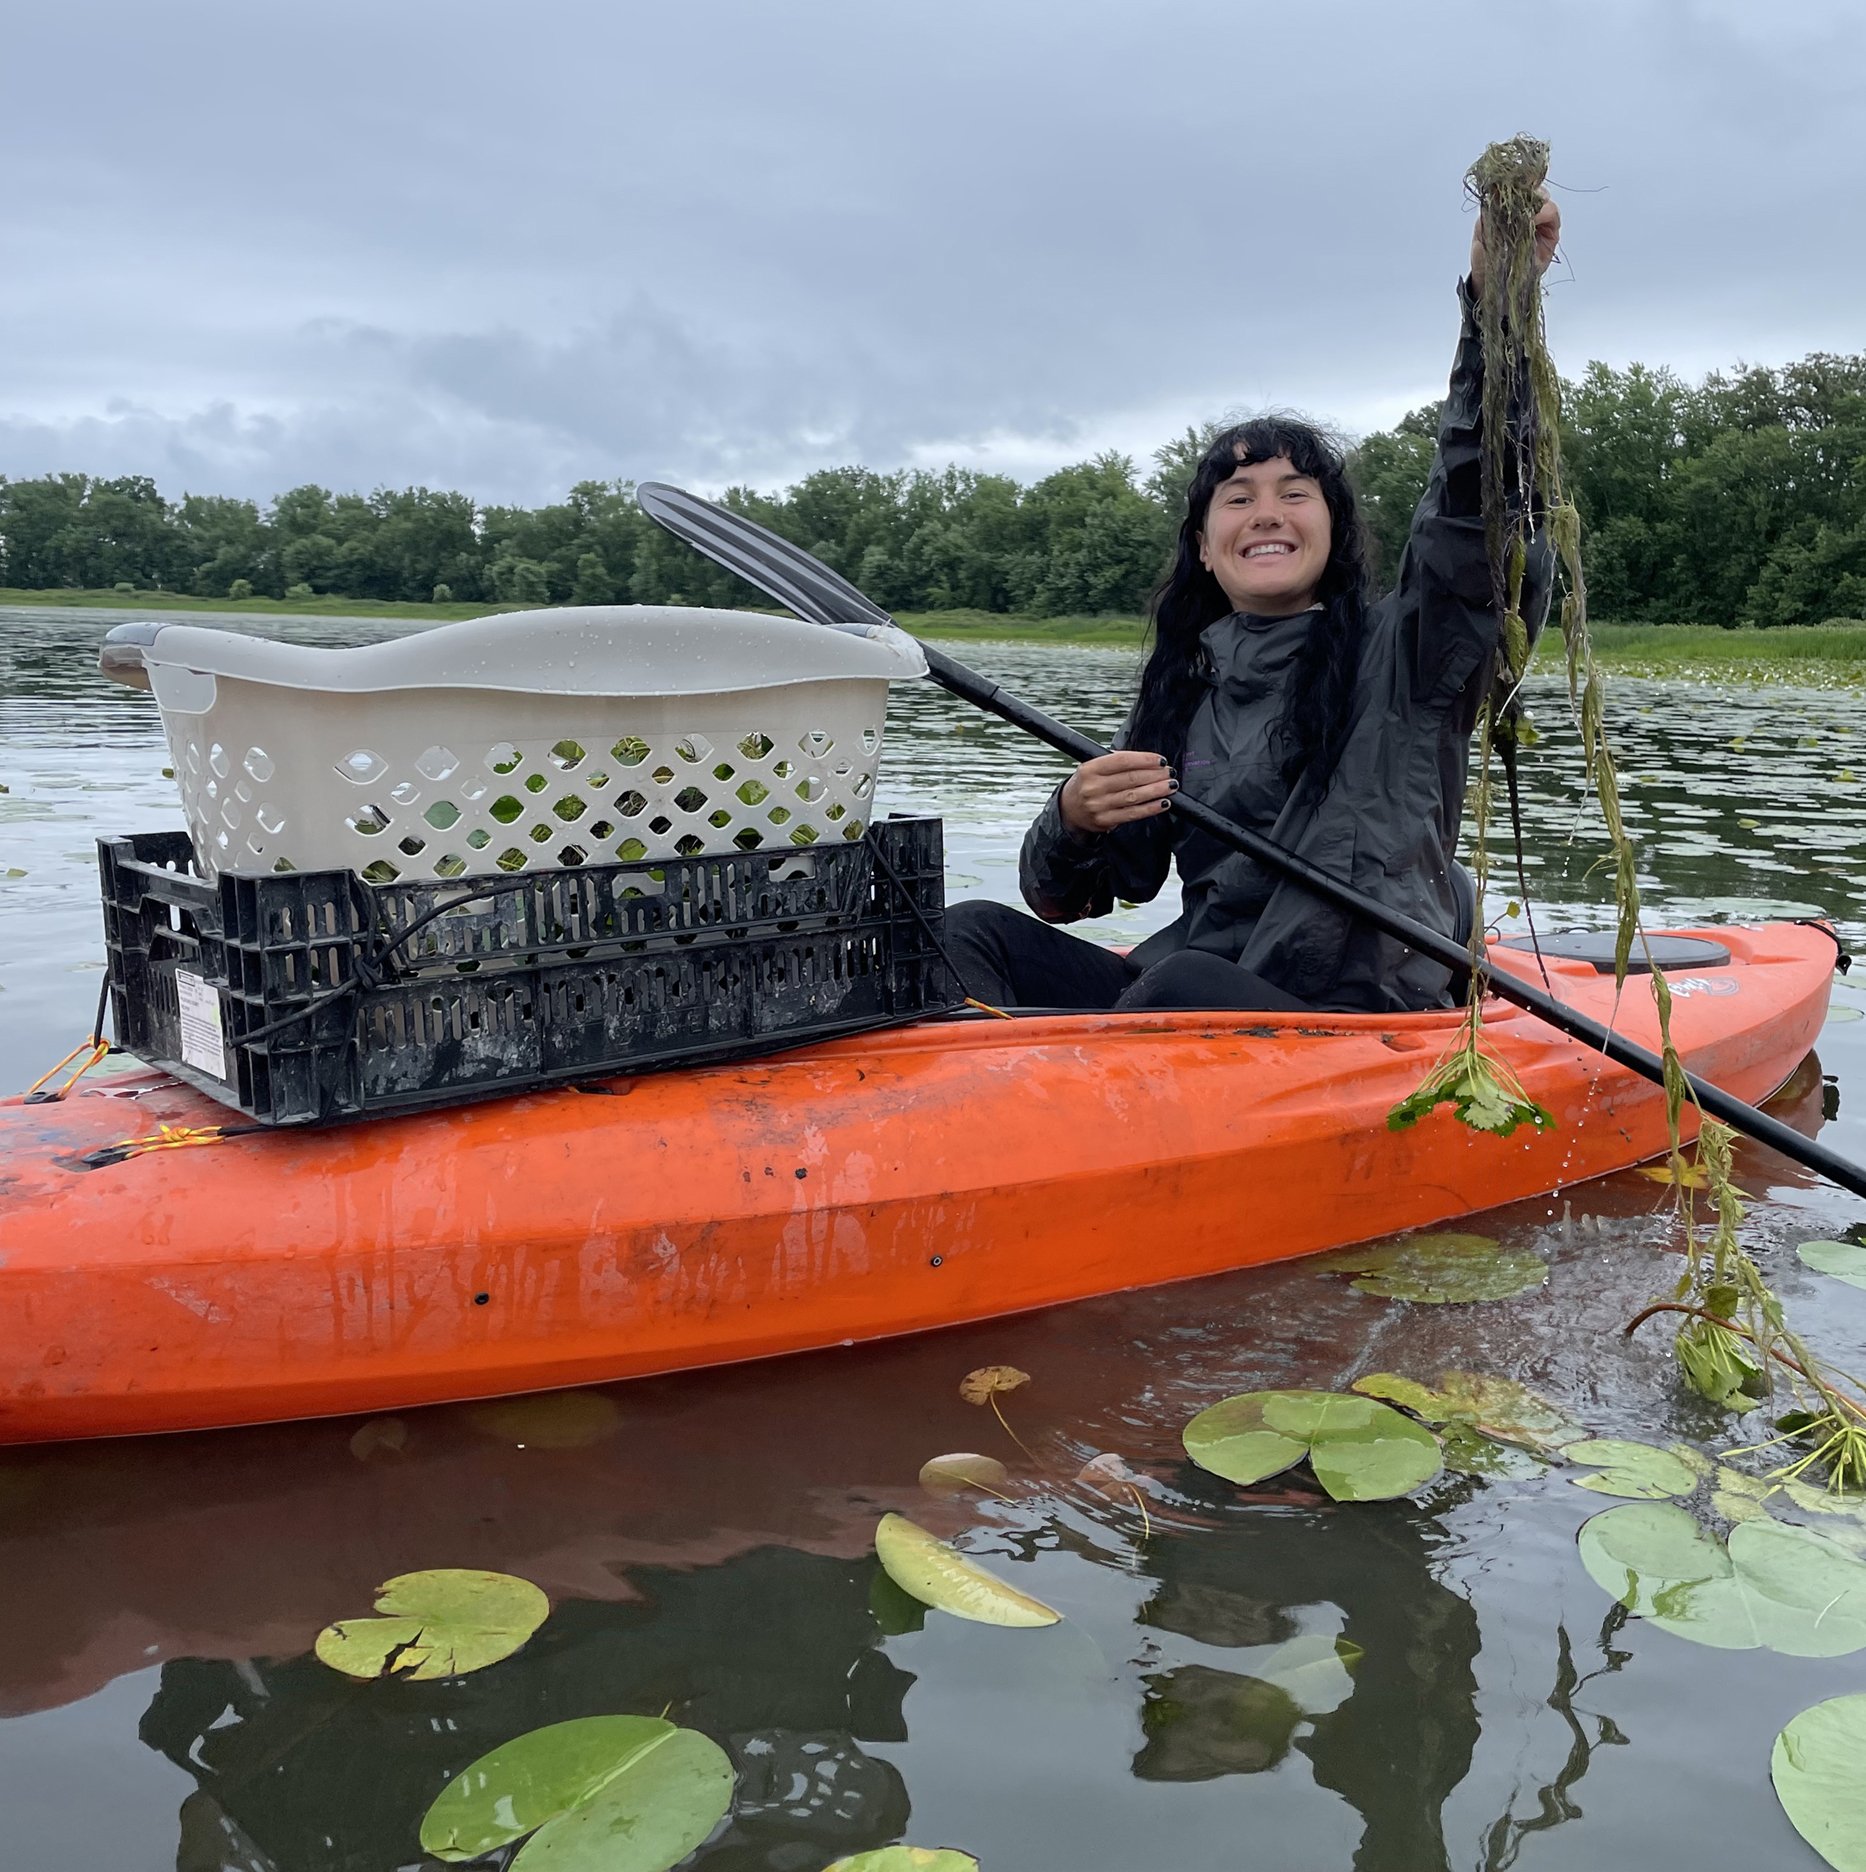 Person in a kayak with a net pulling invasive species from the water